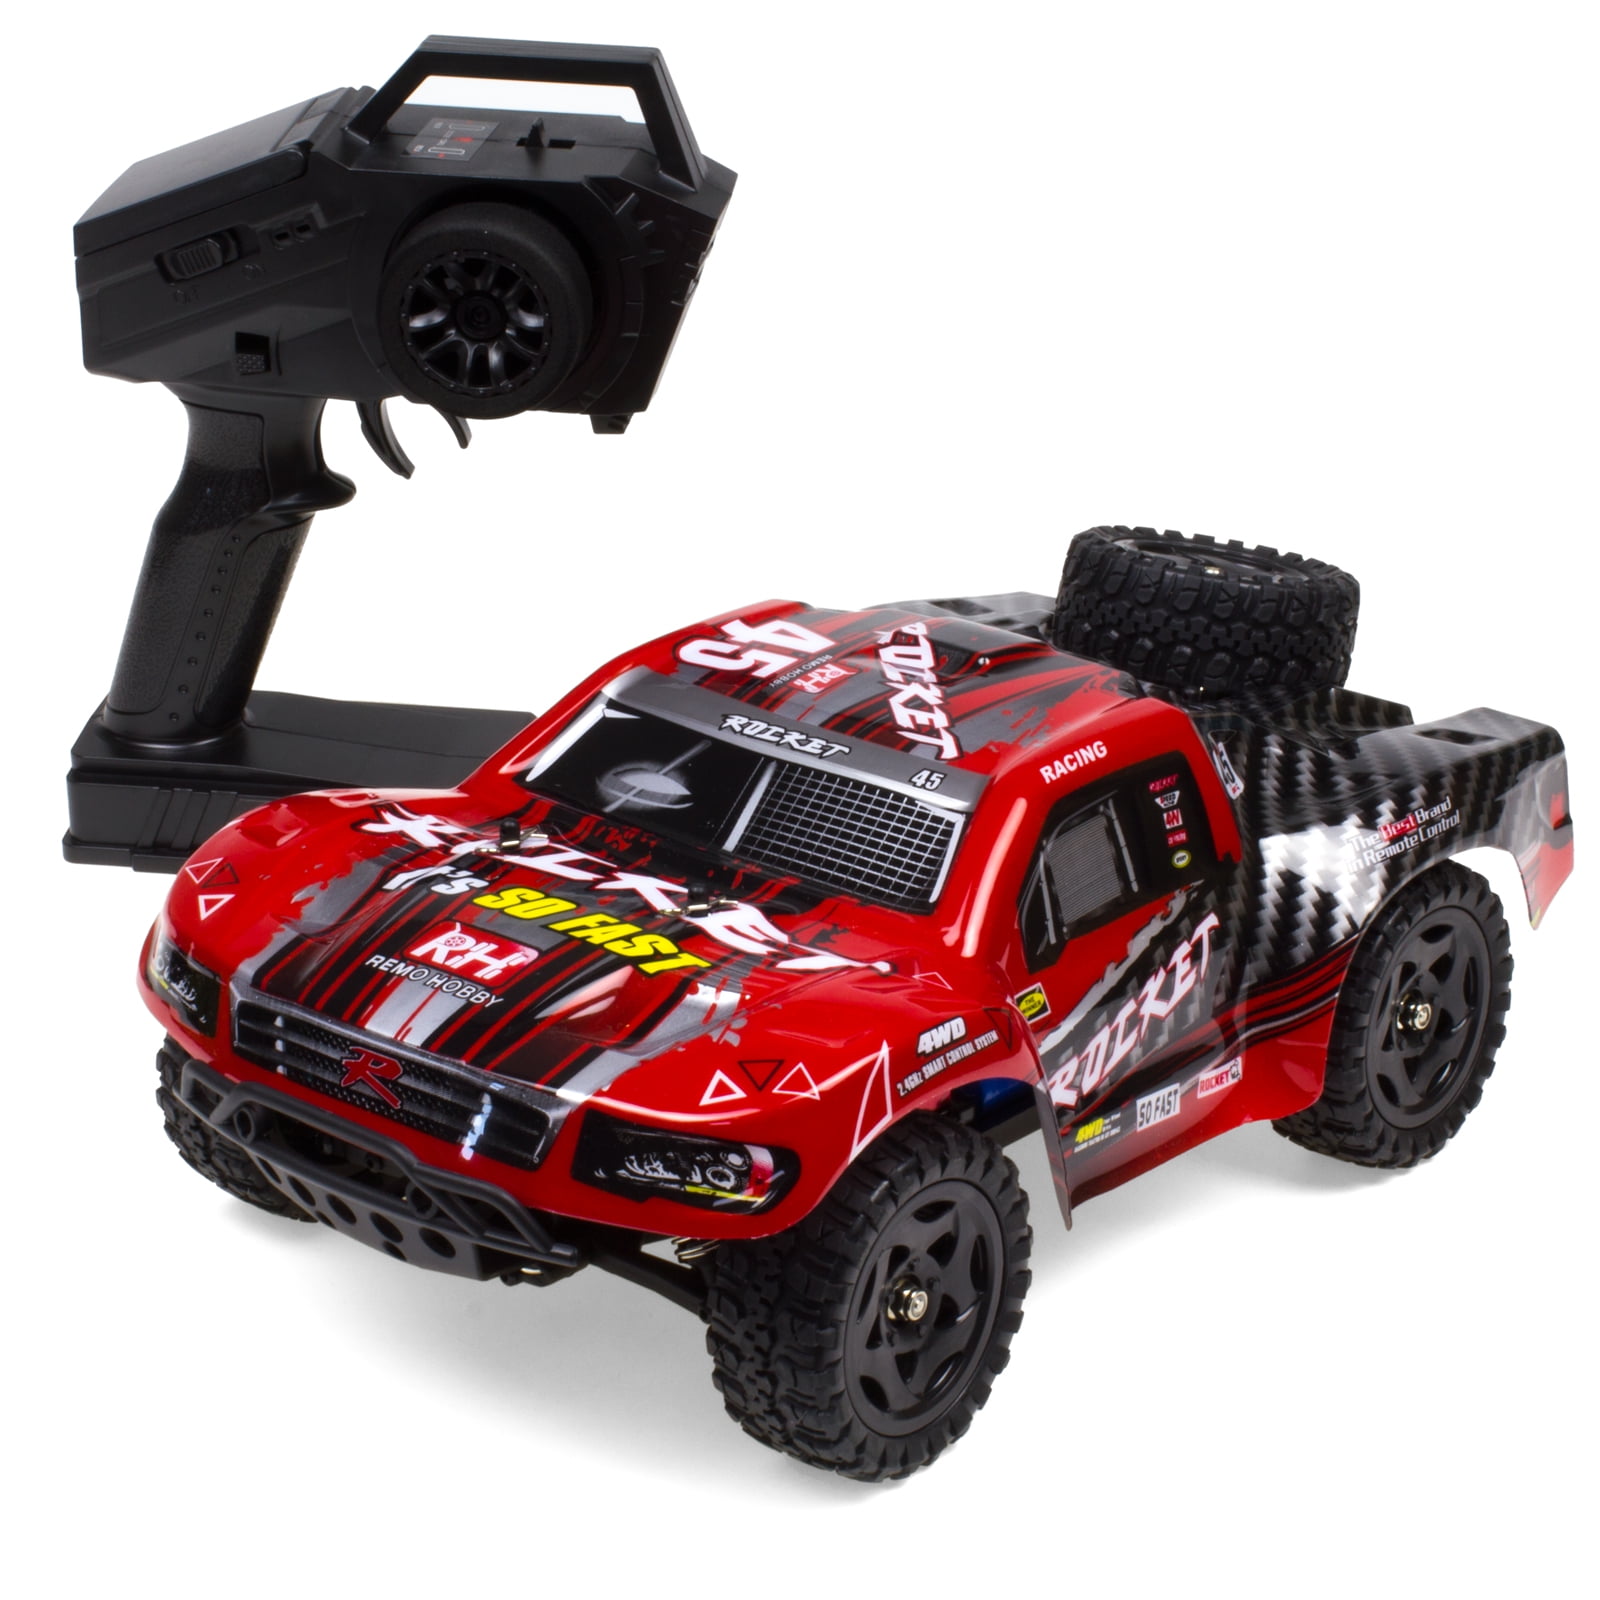 REMO 1621 1/16 RC Truck Car 50km/h 2.4G 4WD Waterproof Brushed Short Course SUV 